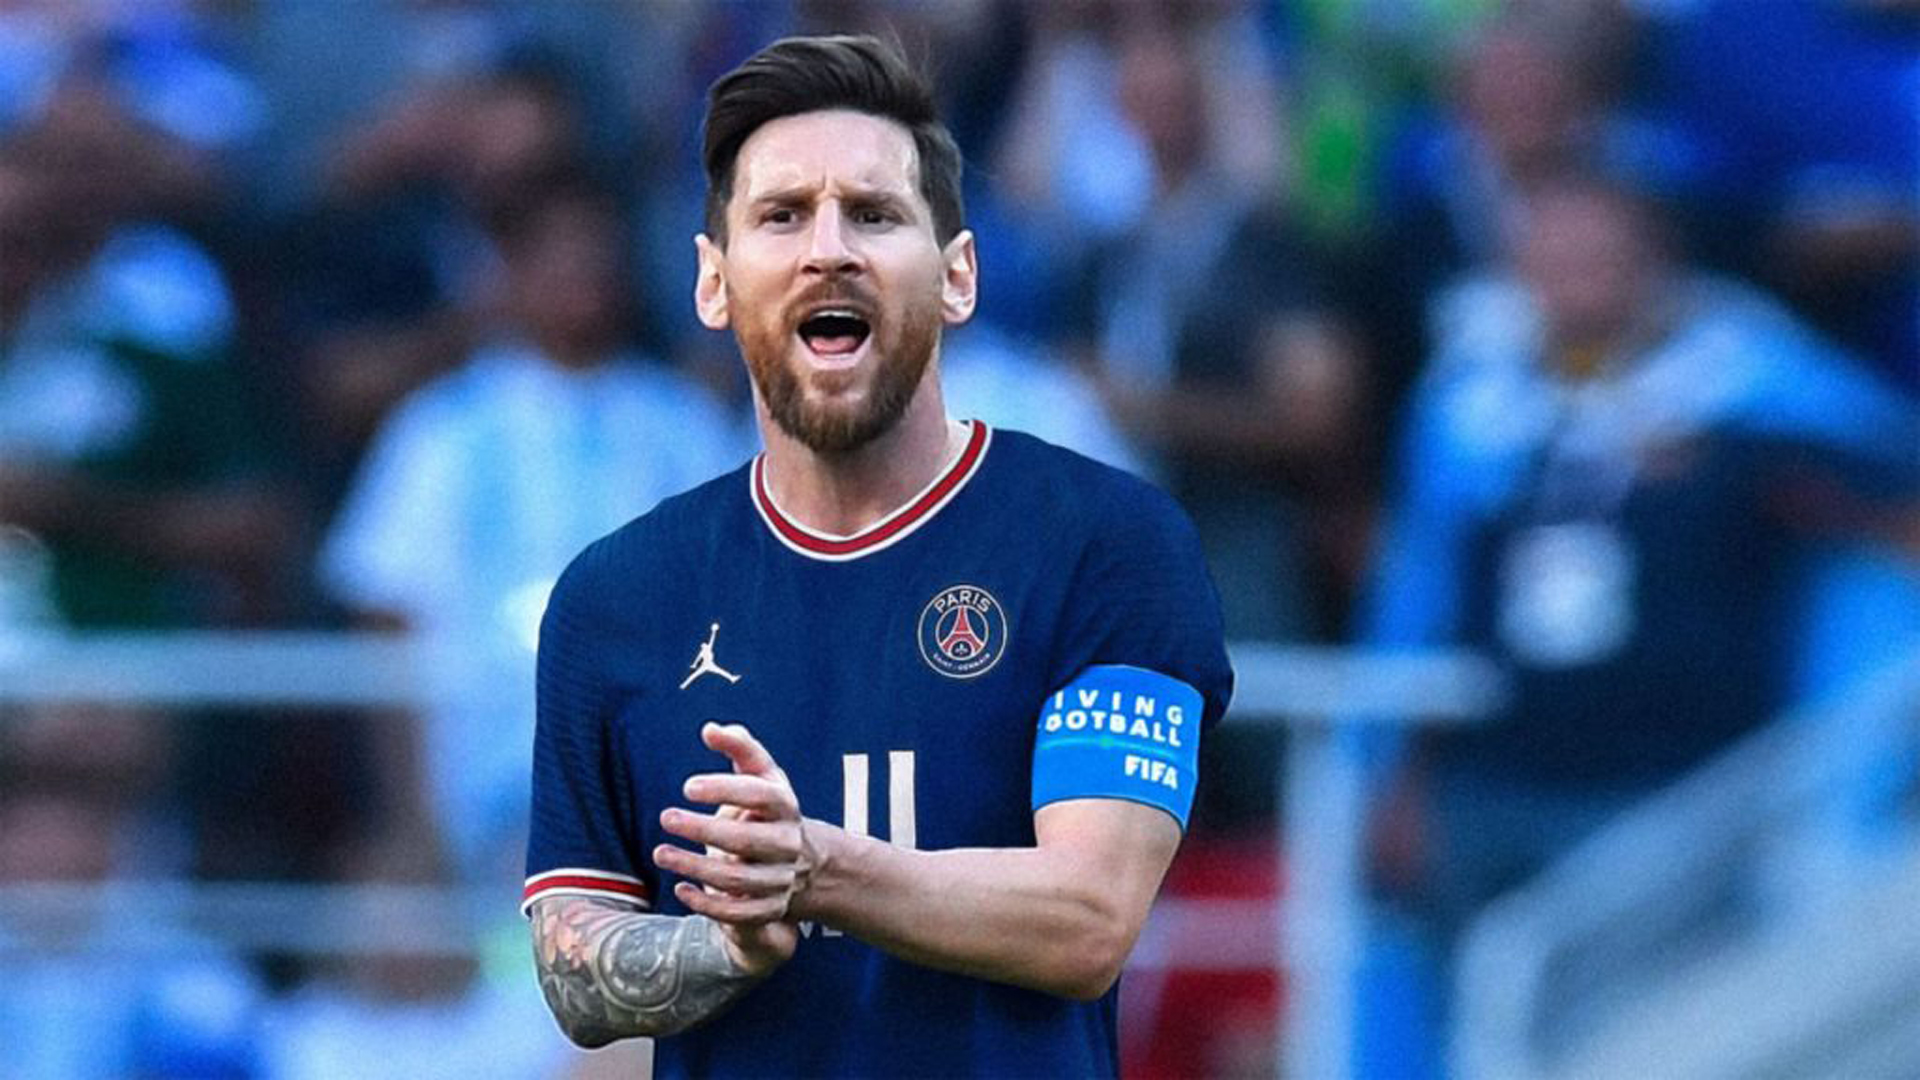 Messi PSG Is Wearing Blue Dress Standing In Blur Audience Wallpaper HD Messi